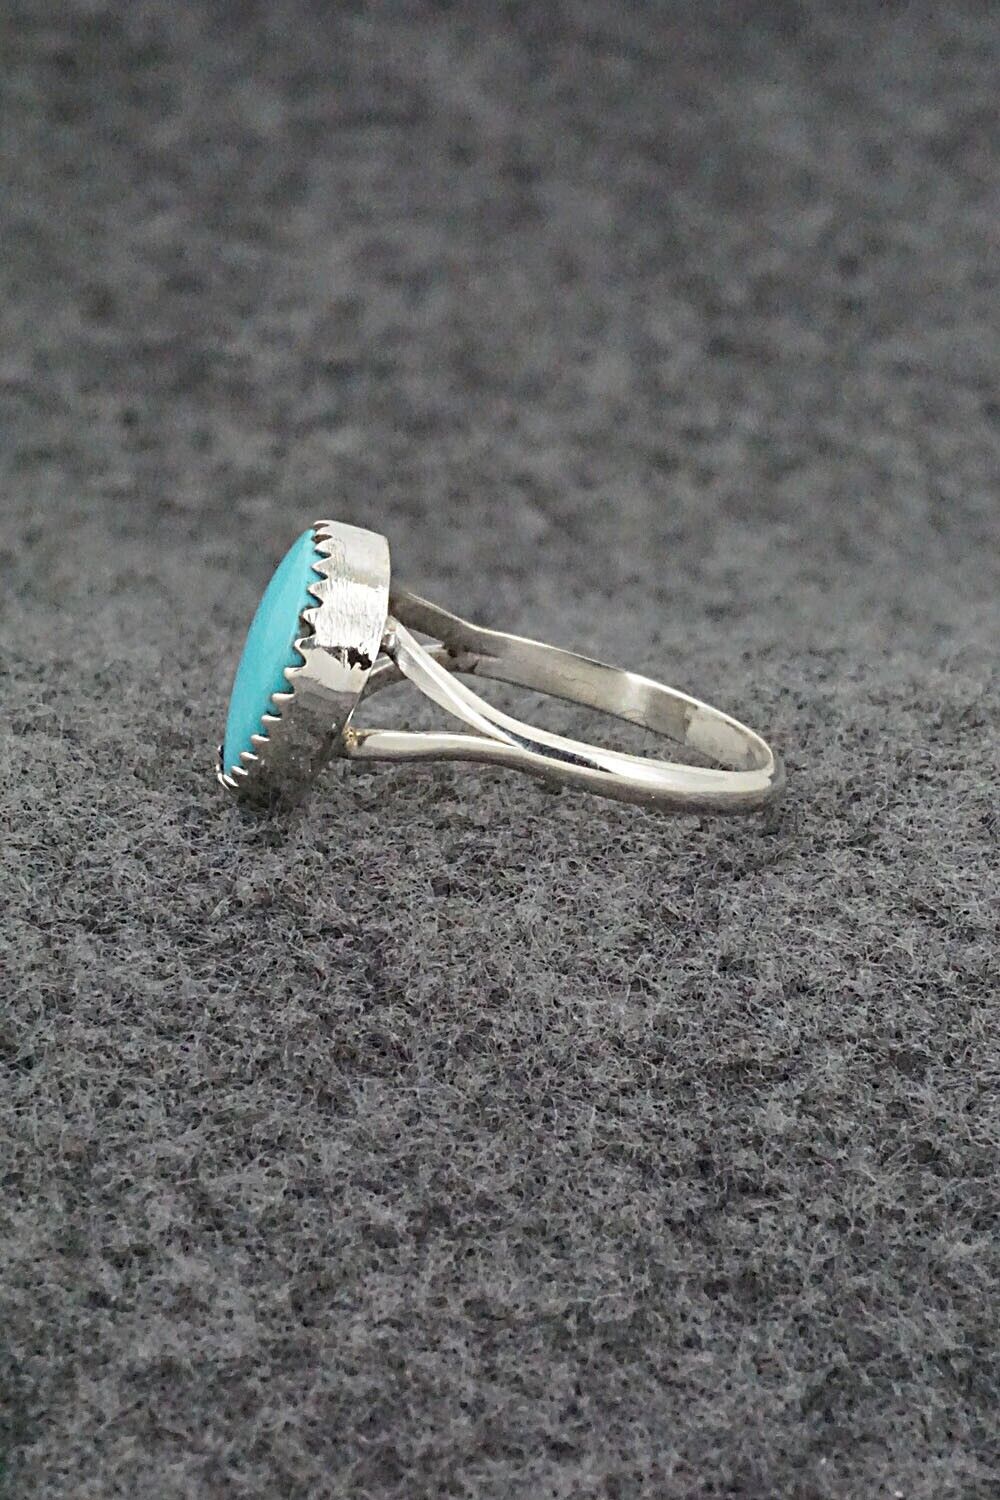 Turquoise & Sterling Silver Ring - Theresa Smith - Size 6.5